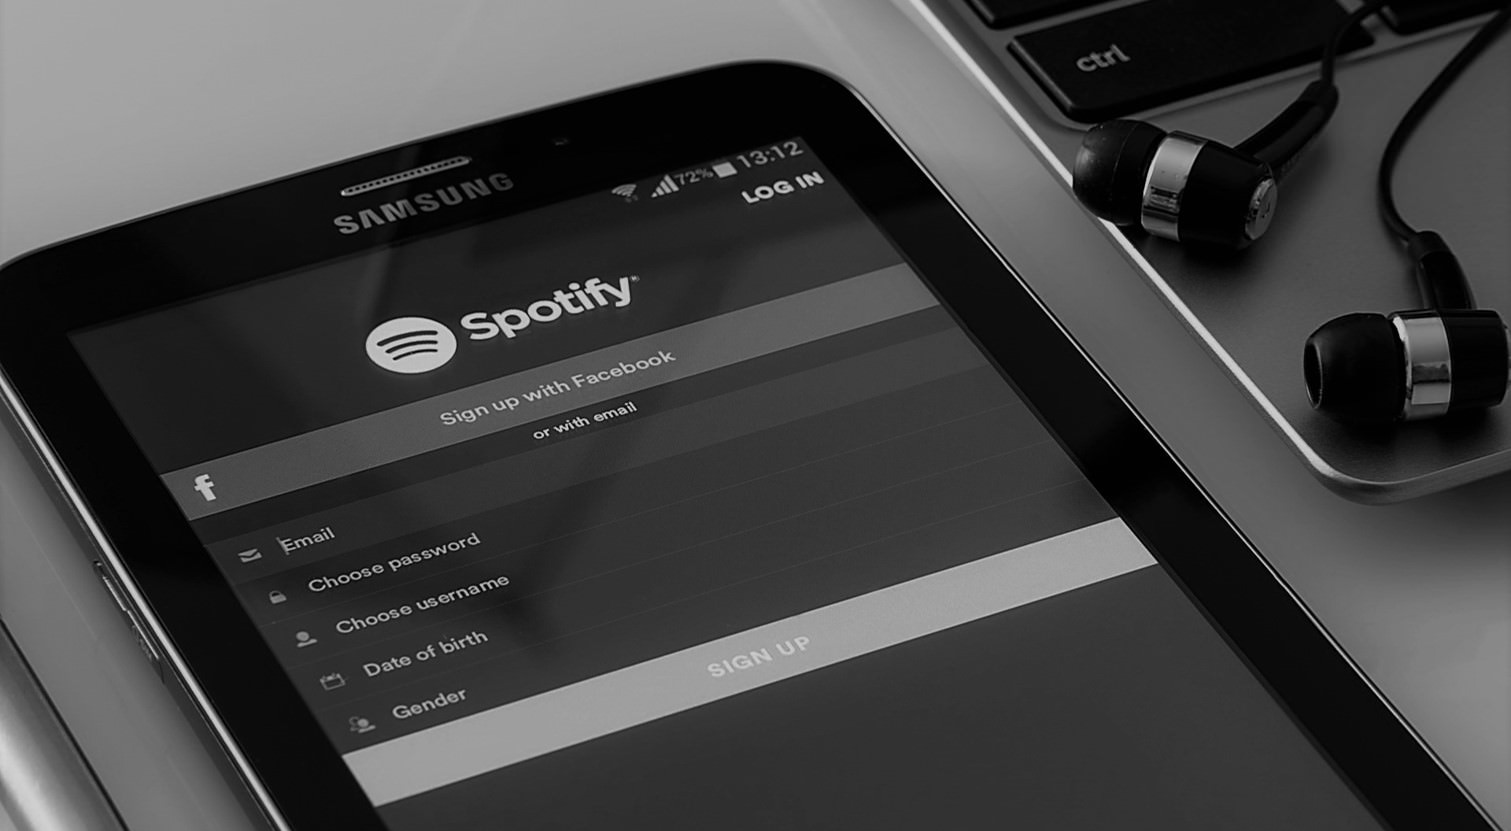 Spotify Considers IPO Under Direct Listing Rules